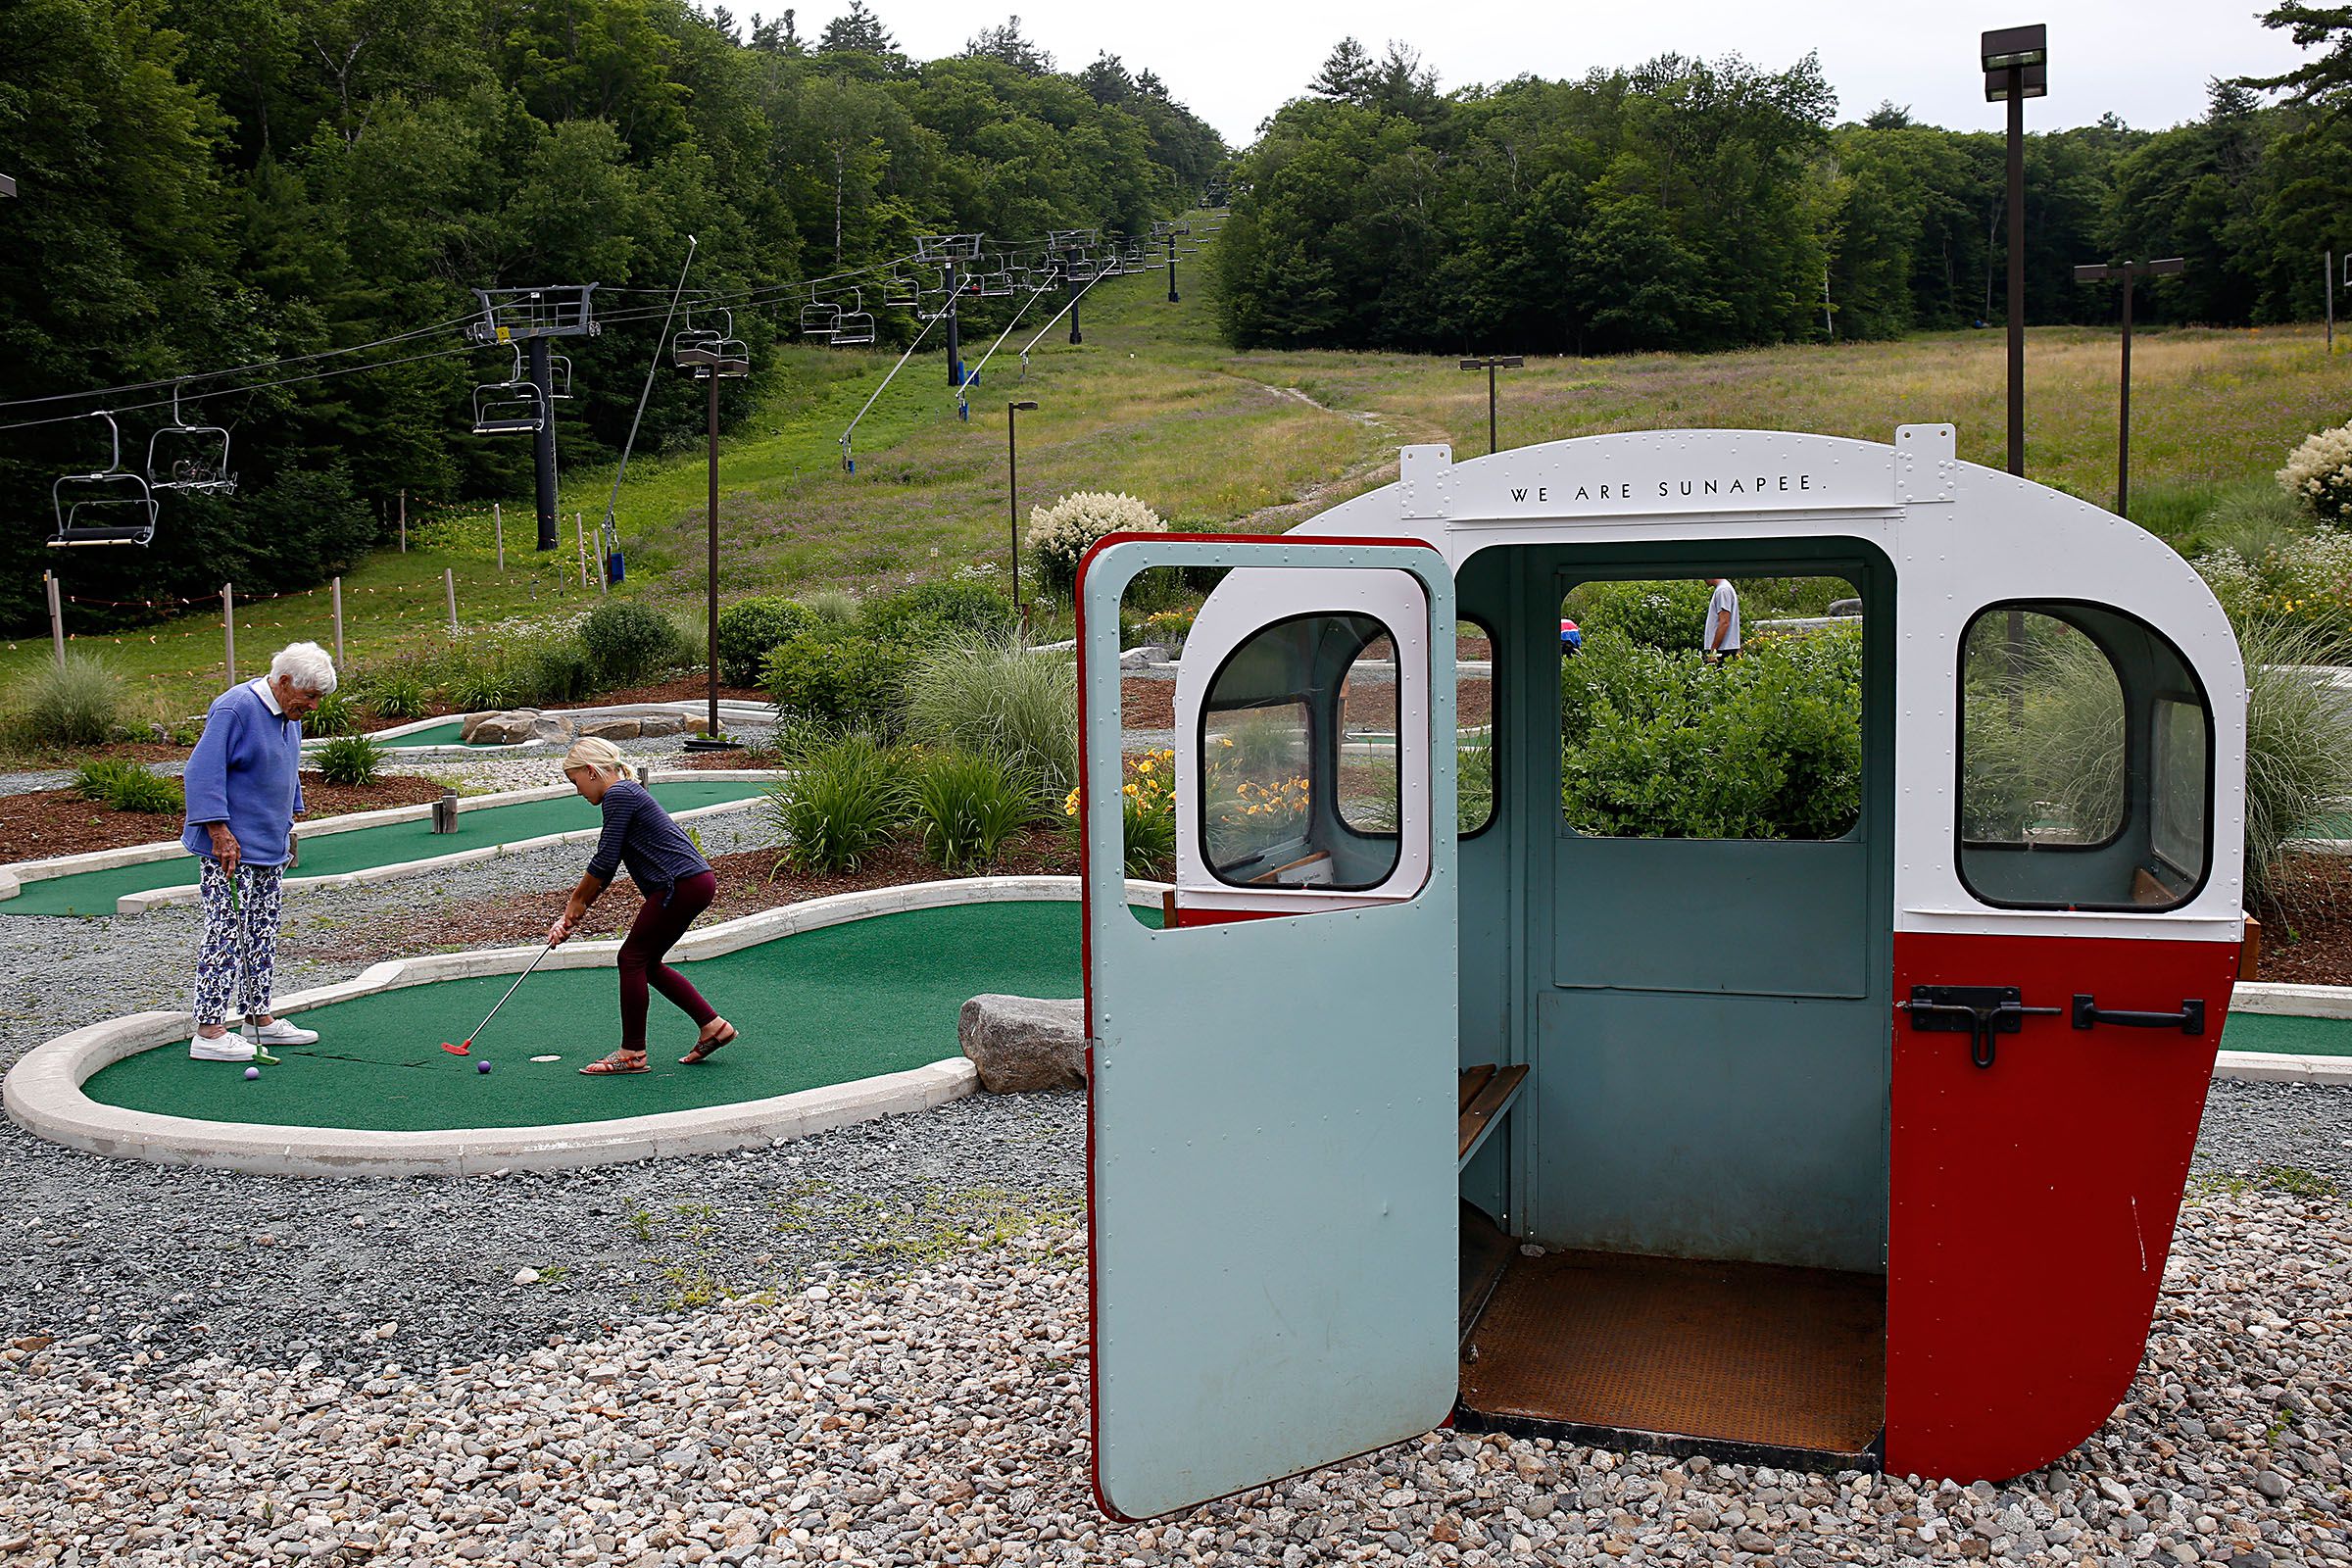 Betty Holcomb, of Newbury, N.H., watches her granddaughter Betty Holcomb, 10, of Durango, Colo., make a putt on the mini golf course at Mount Sunapee Resort's Adventure Park in Sunapee, N.H., on July 14, 2018. Betty Holcomb usually comes to visit her namesake once a year. (Valley News - Geoff Hansen) Copyright Valley News. May not be reprinted or used online without permission. Send requests to permission@vnews.com.